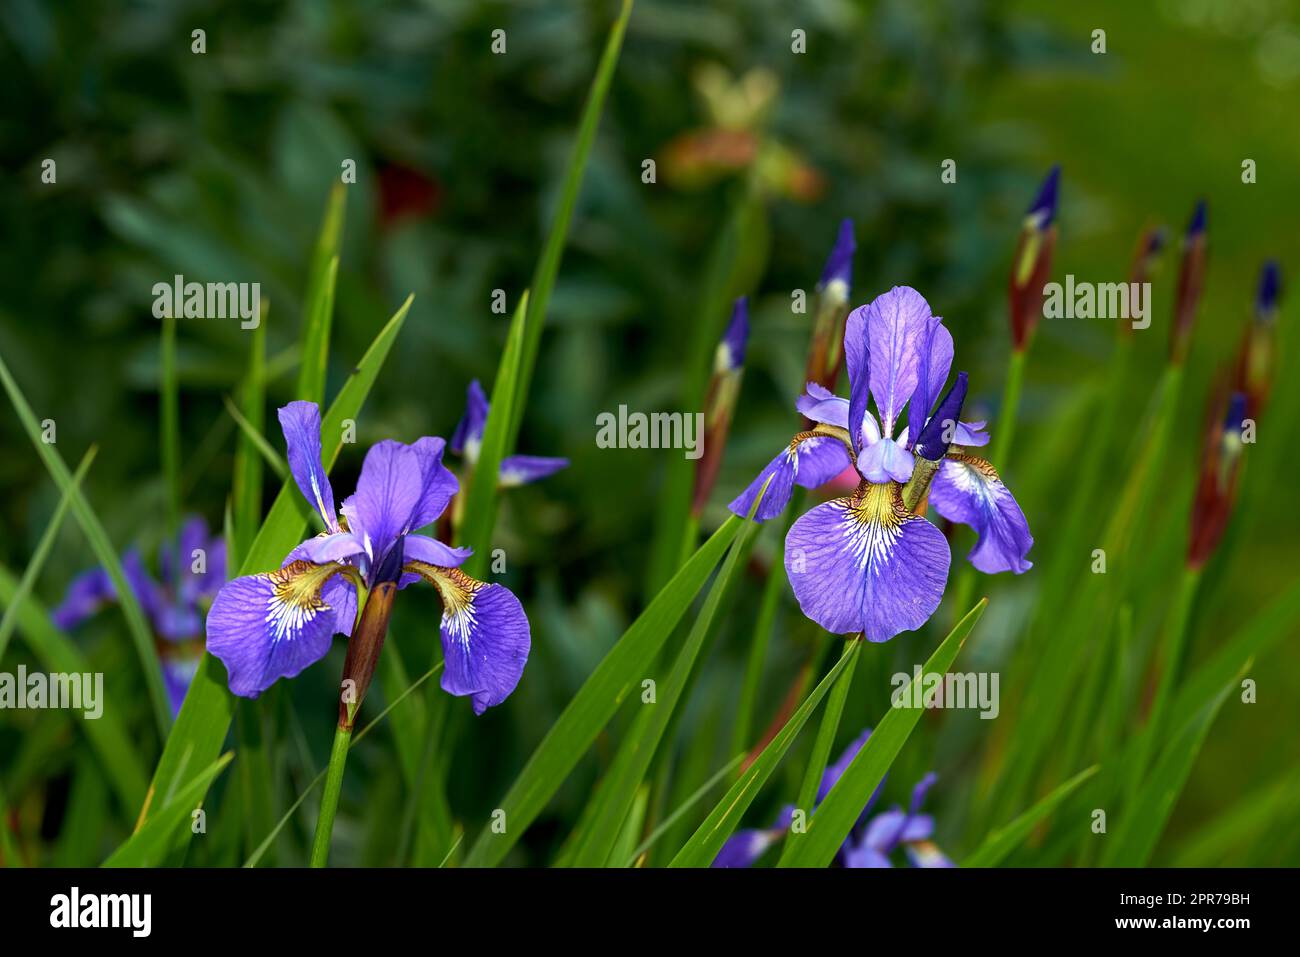 Closeup of blue iris sibirica growing on green stems or stalks against bokeh background in home garden. Two vibrant herbaceous perennials flowers blossoming and blooming in backyard or remote meadow Stock Photo